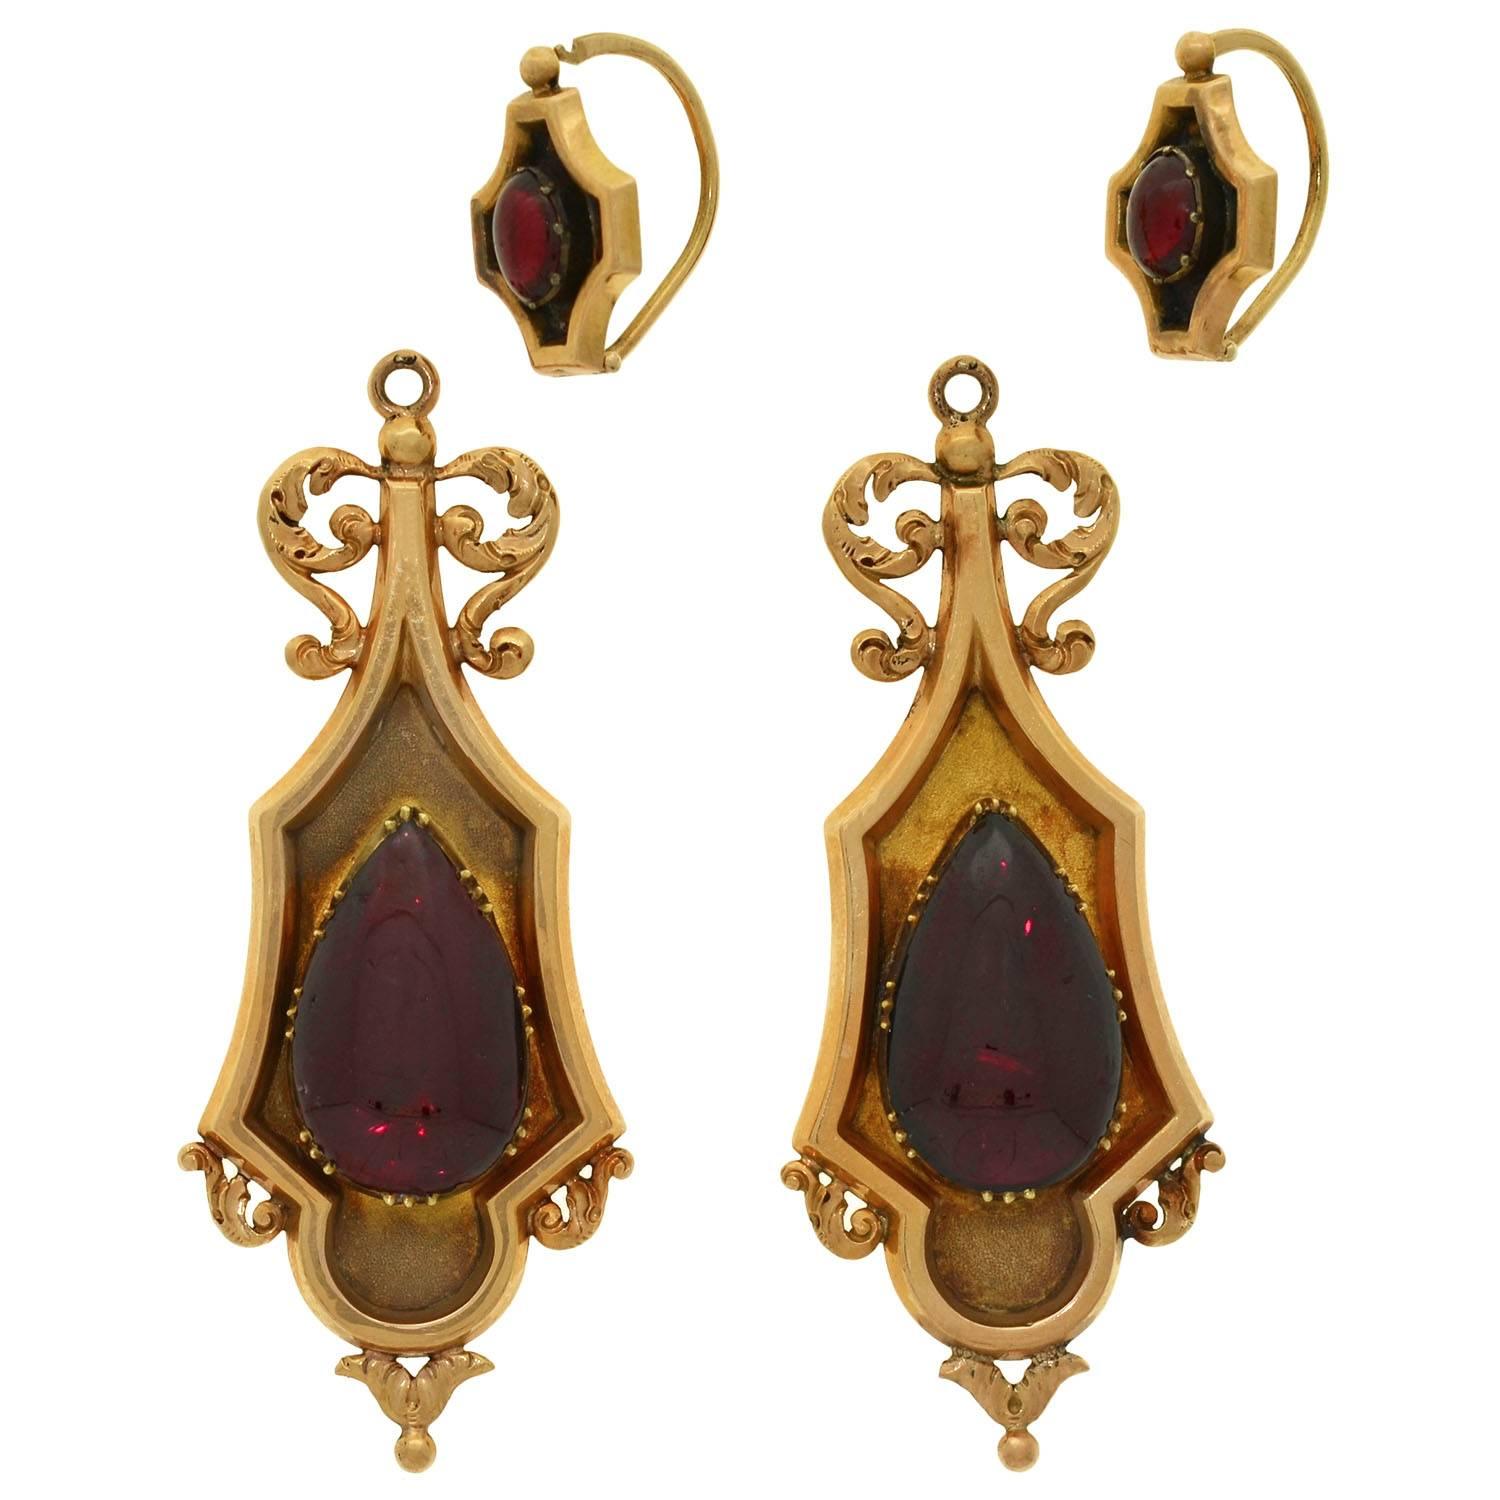 Absolutely incredible cabochon garnet earrings from the Georgian (ca1830) period. These fantastic earrings are made of 18kt gold and are particularly large in size. With a magnificent and royal-looking appearance, each earring has a smooth gold